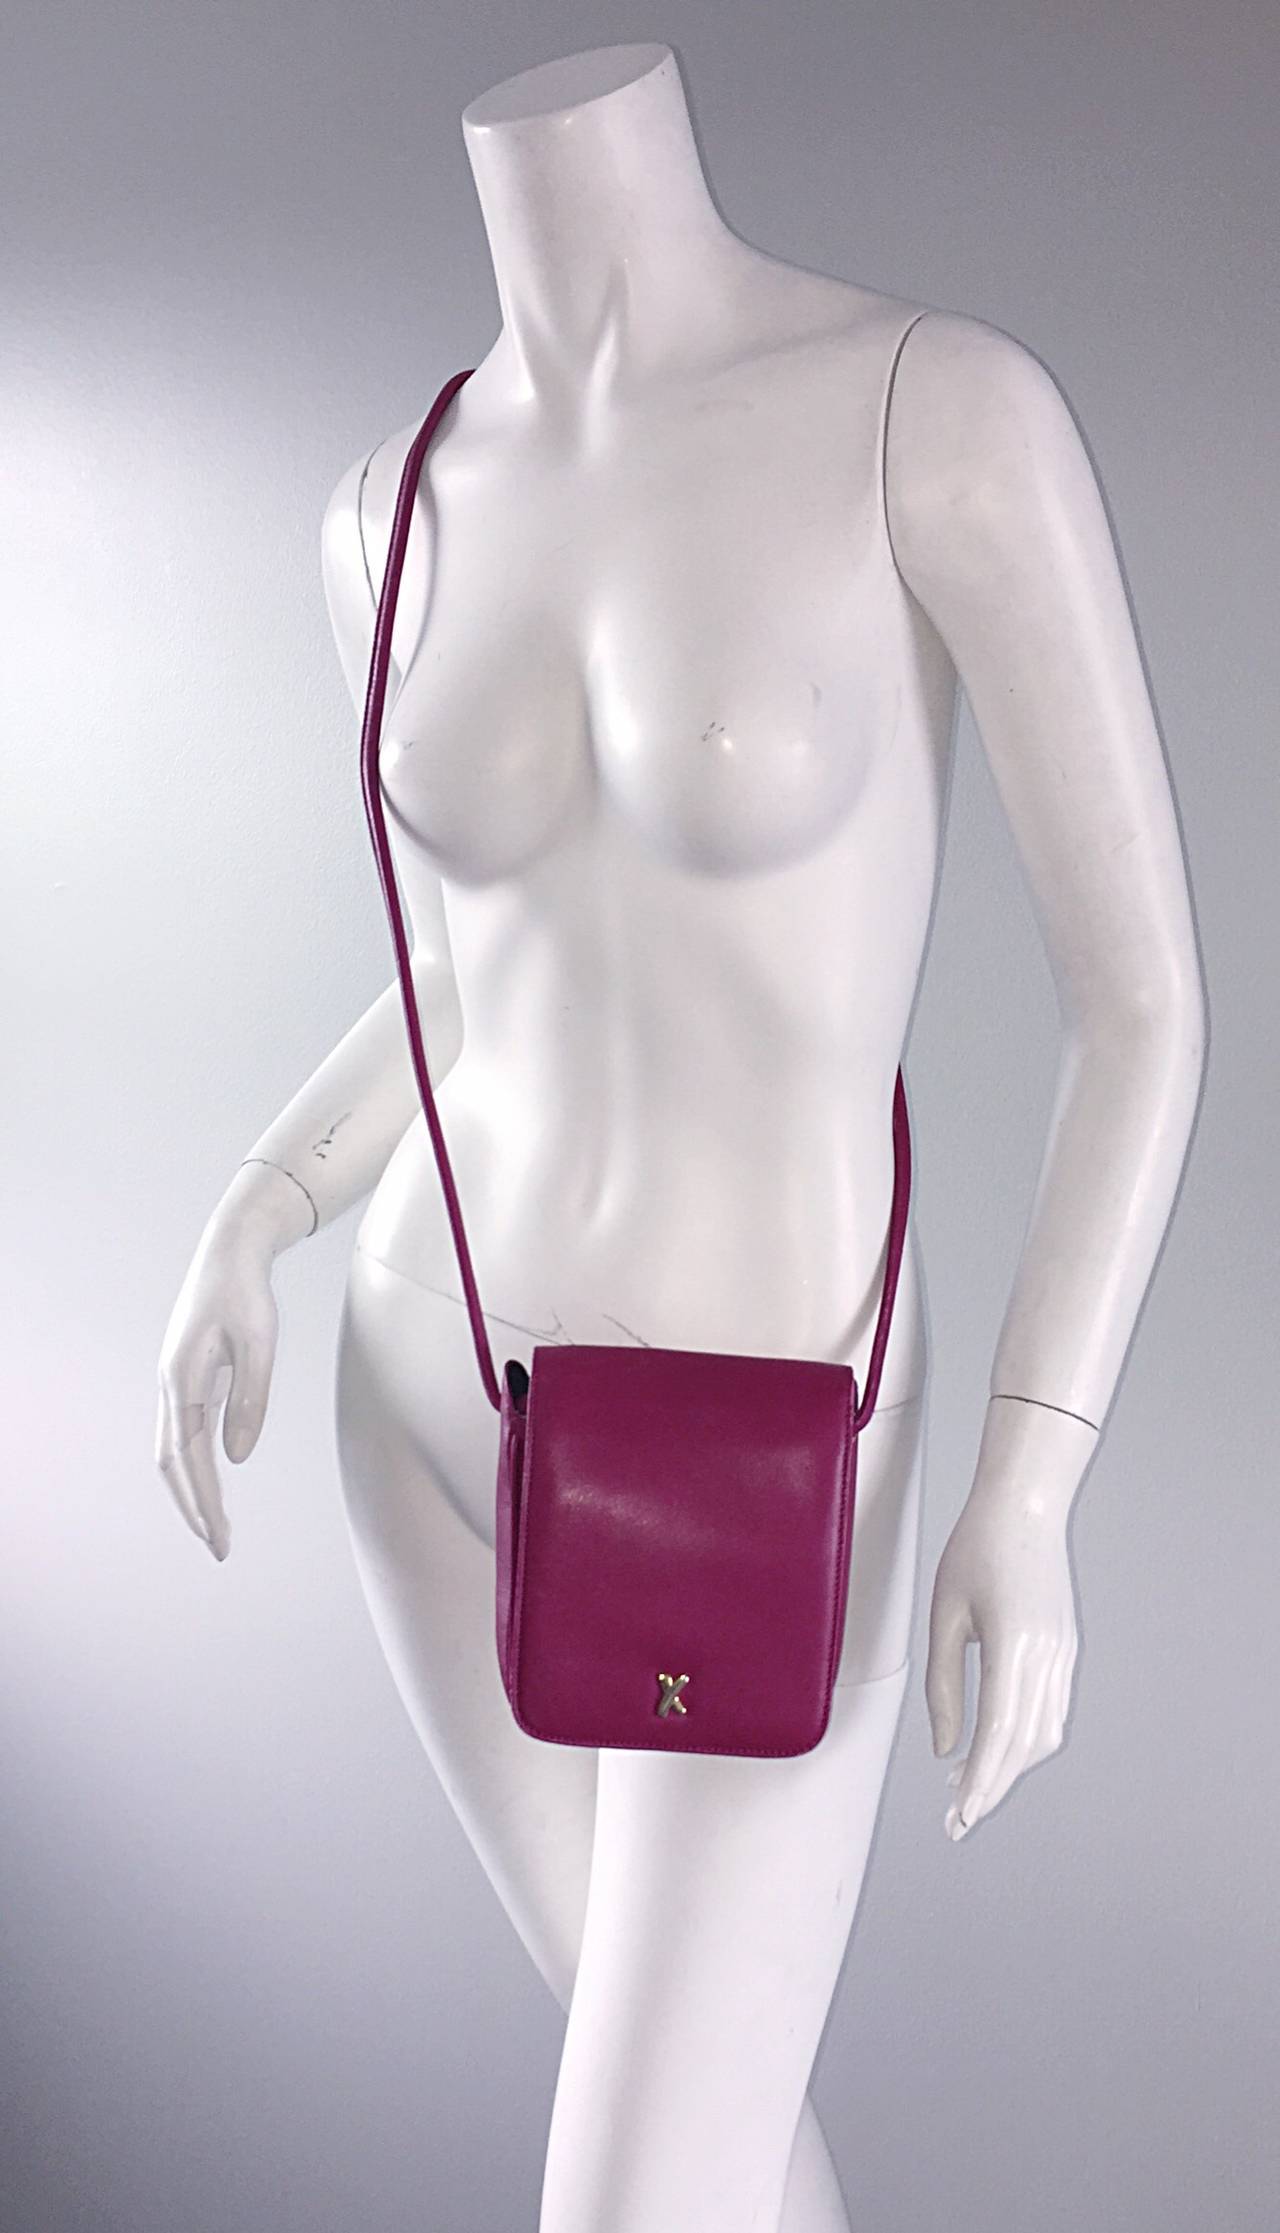 Amazing NEVER WORN Vintage Paloma Picasso crossbody bag/wristlet/shoulder bag! The perfect size....Vibrant fuchsia pink color, with signature 